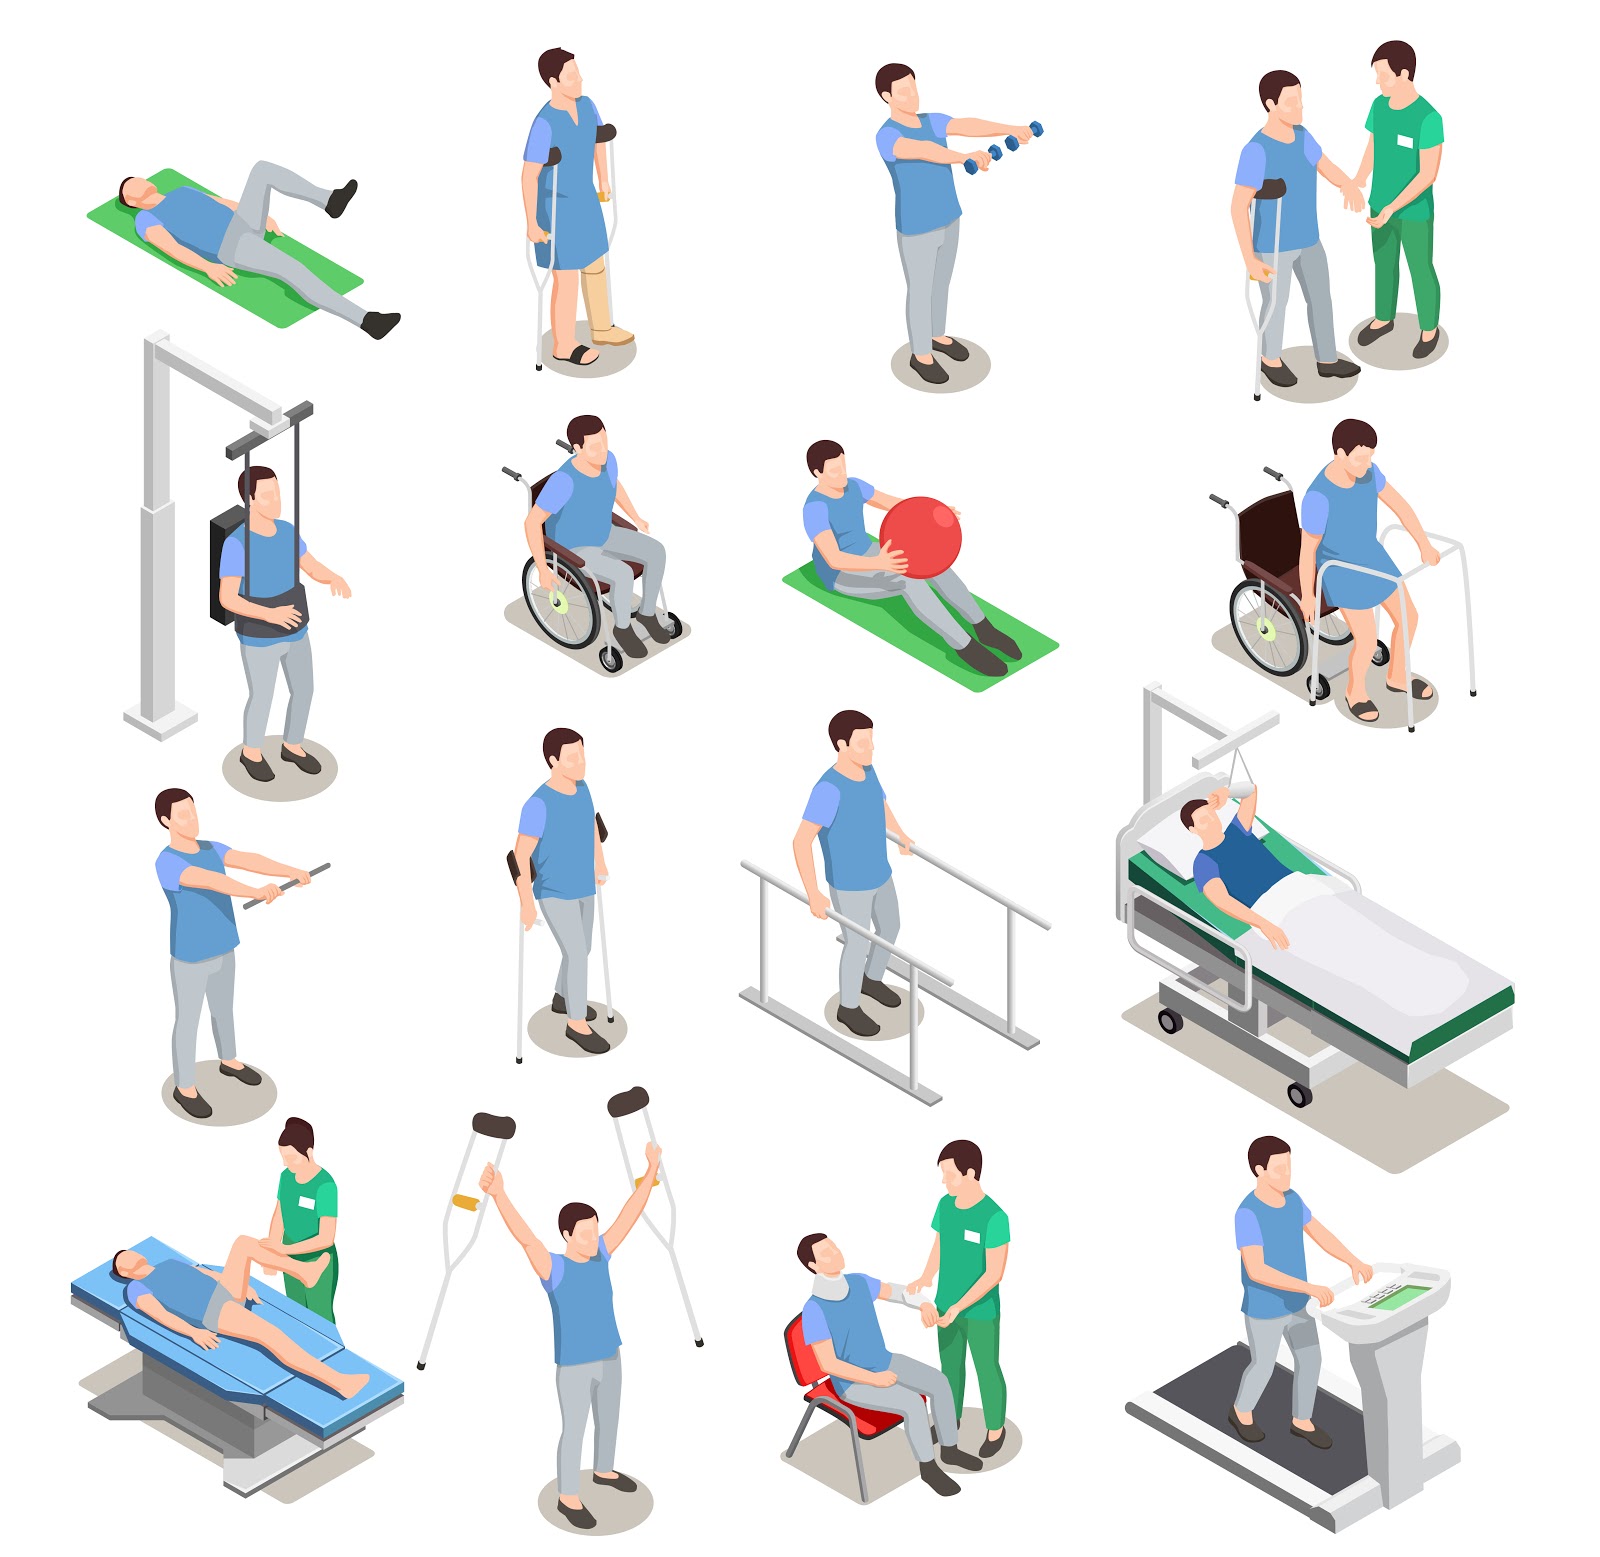 Vector images depicting physiotherapy exercises for knee pain